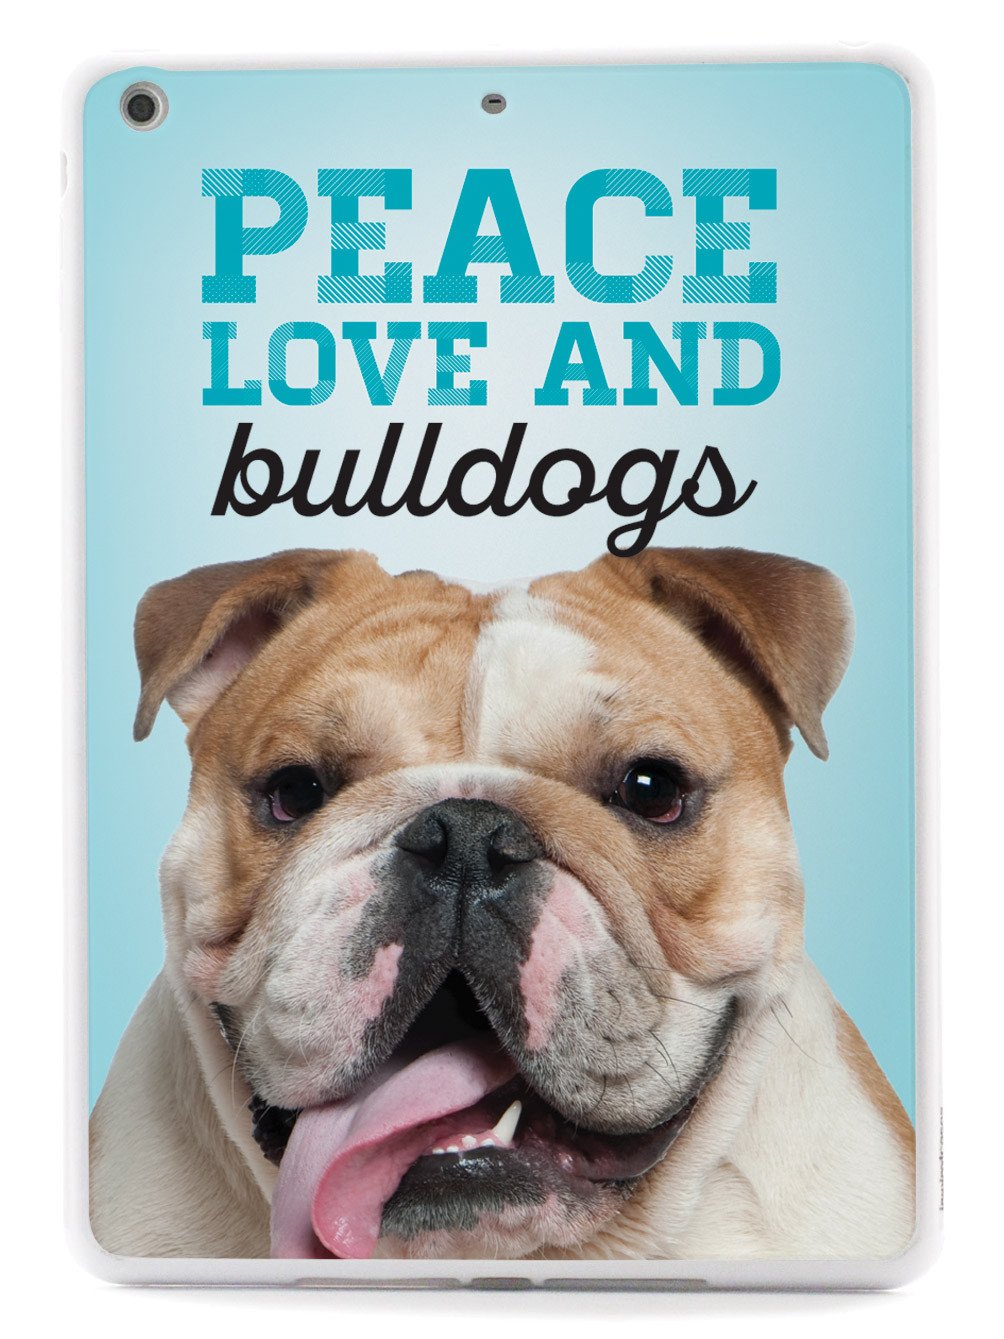 Peace Love and Bulldogs - Real Life Case